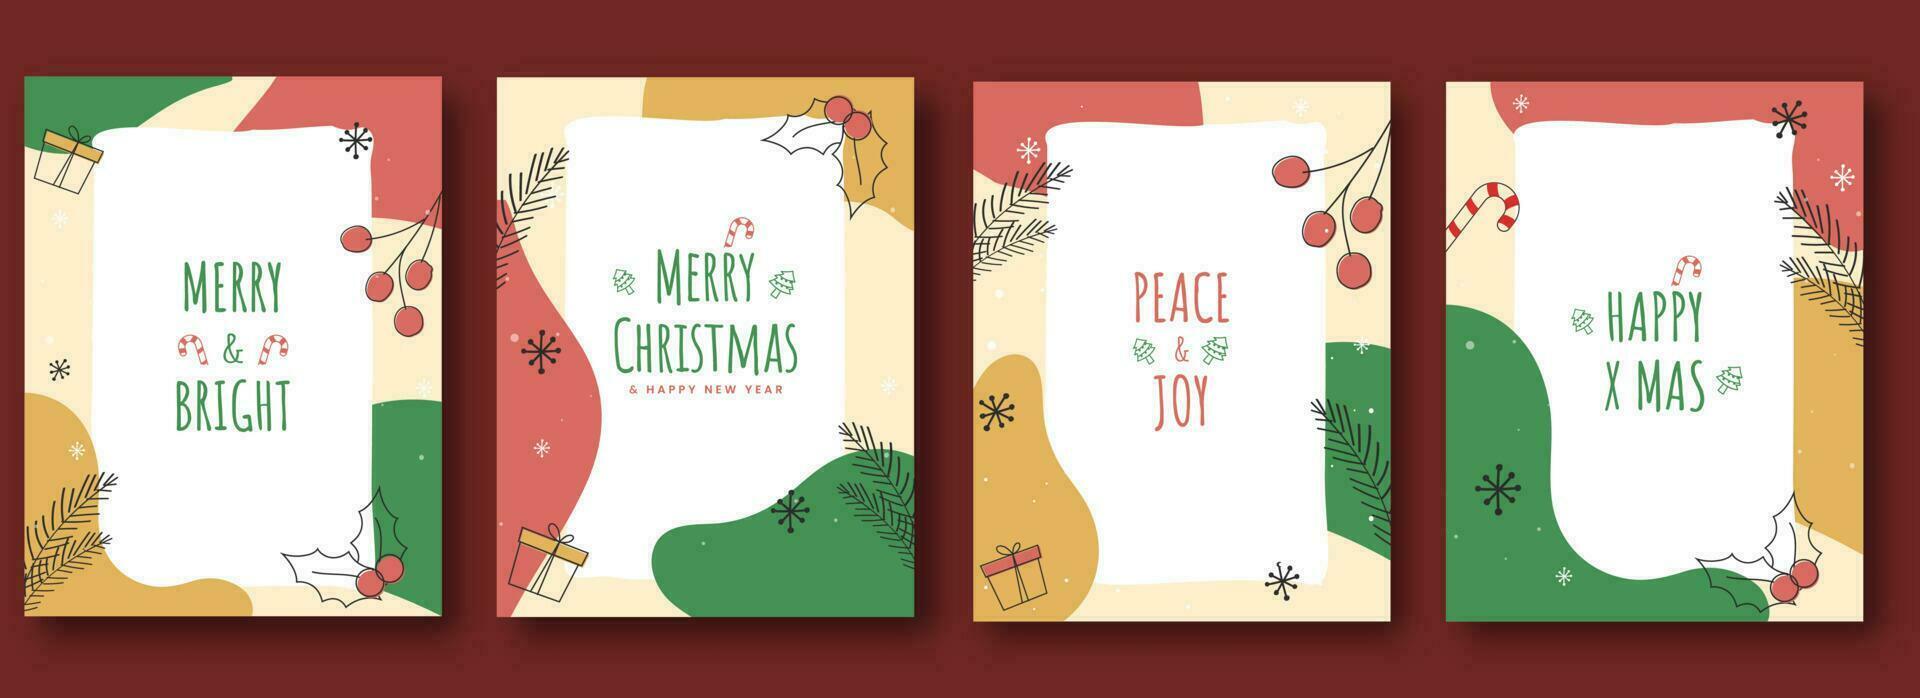 Merry Christmas And New Year Greeting Card Or Flyer Design In Four Options. vector